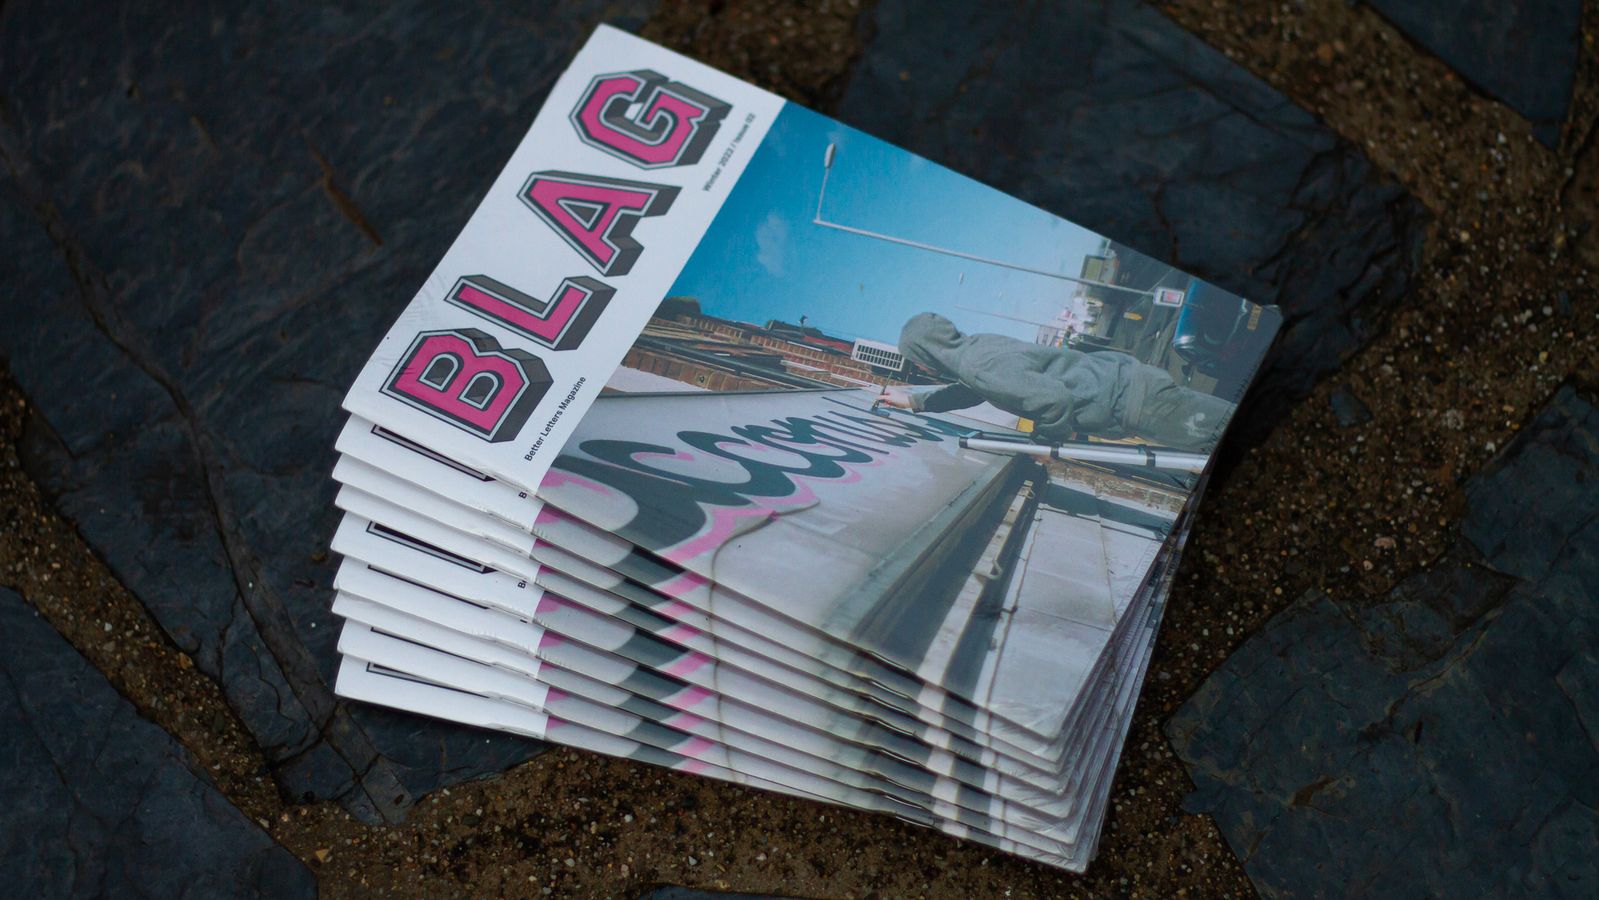 Pile of magazines on paving slabs.